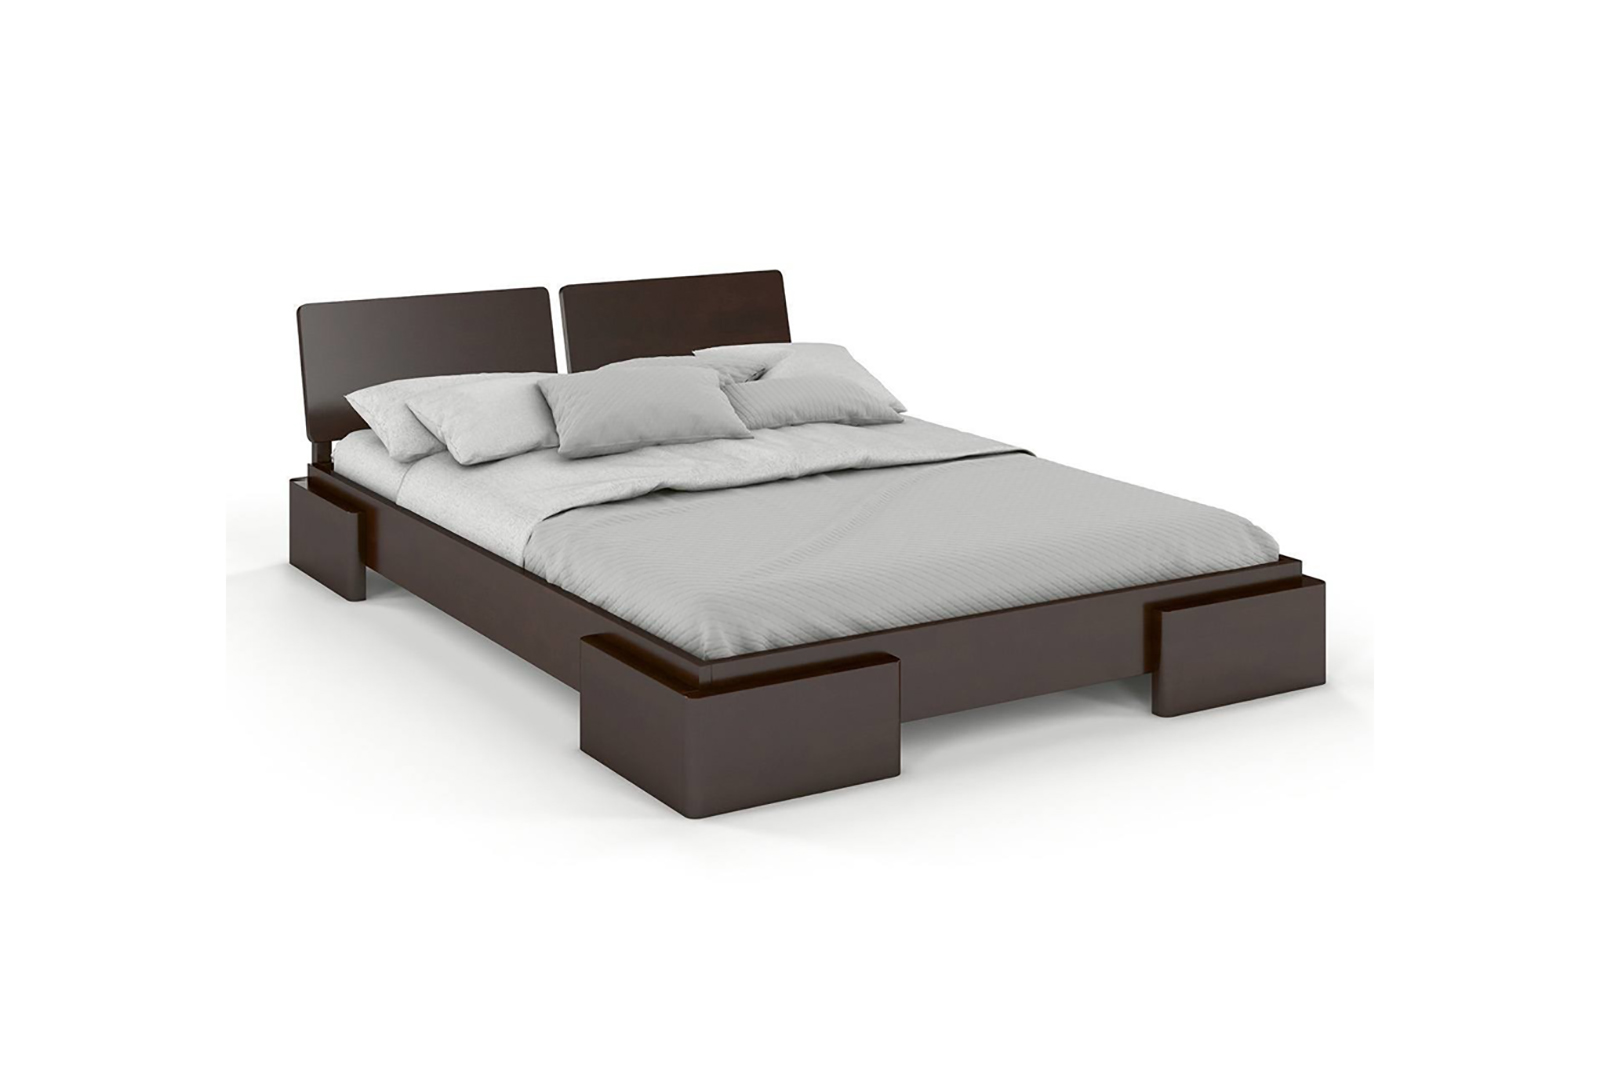 VISBY ARGENTO BEECH BED 2